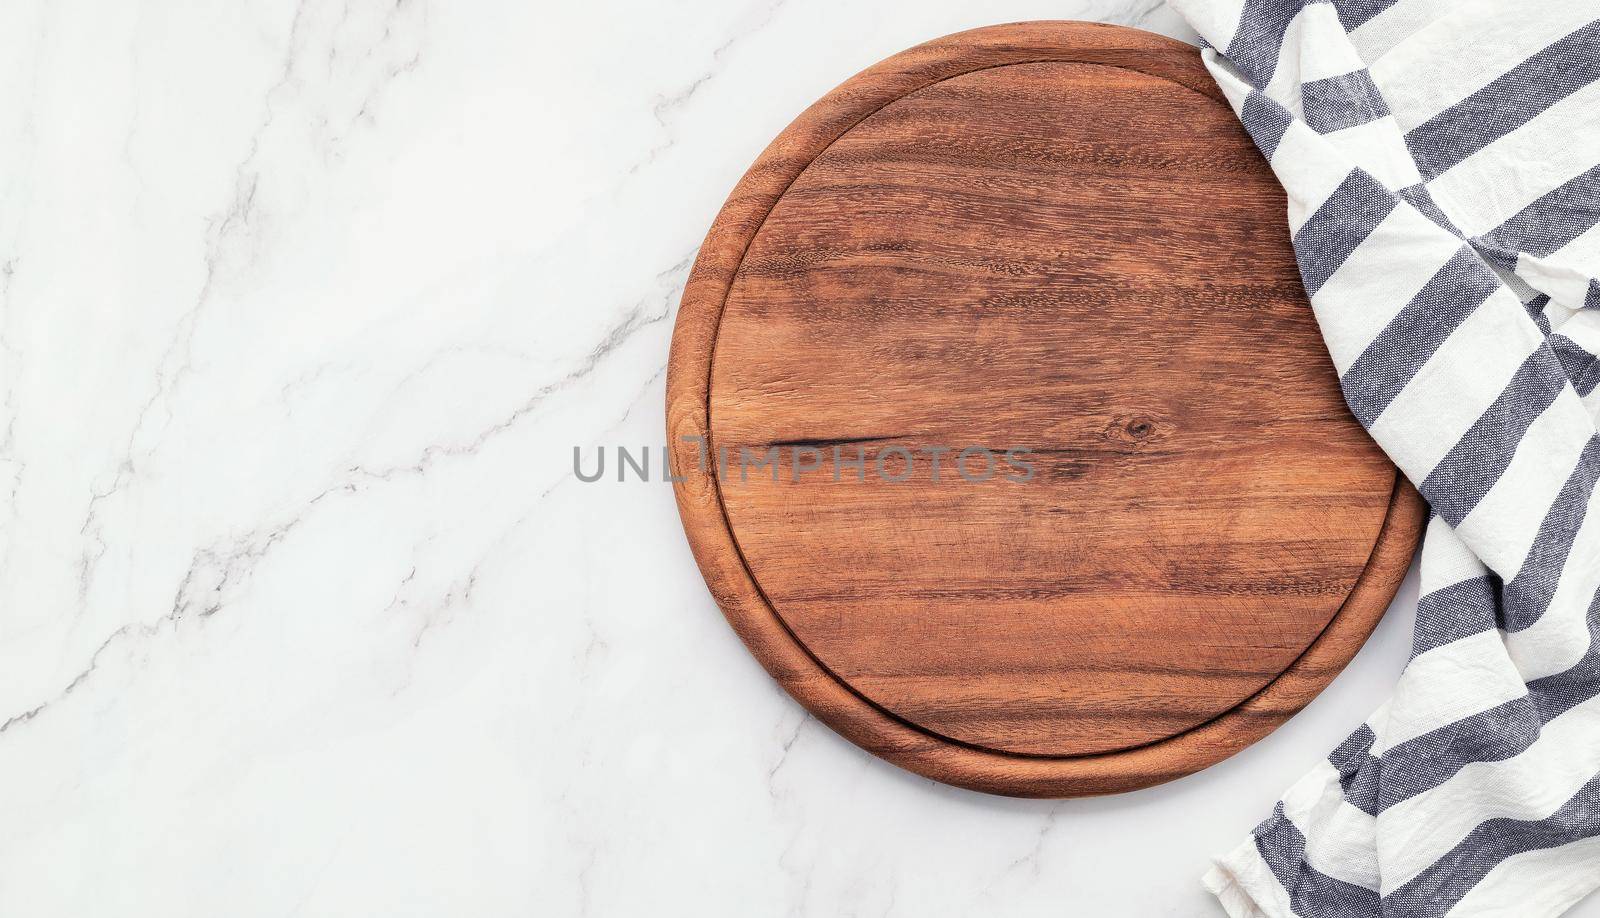 Empty wooden pizza platter with napkin set up on marble stone kitchen table. Pizza board and tablecloth on white marble background. by kerdkanno